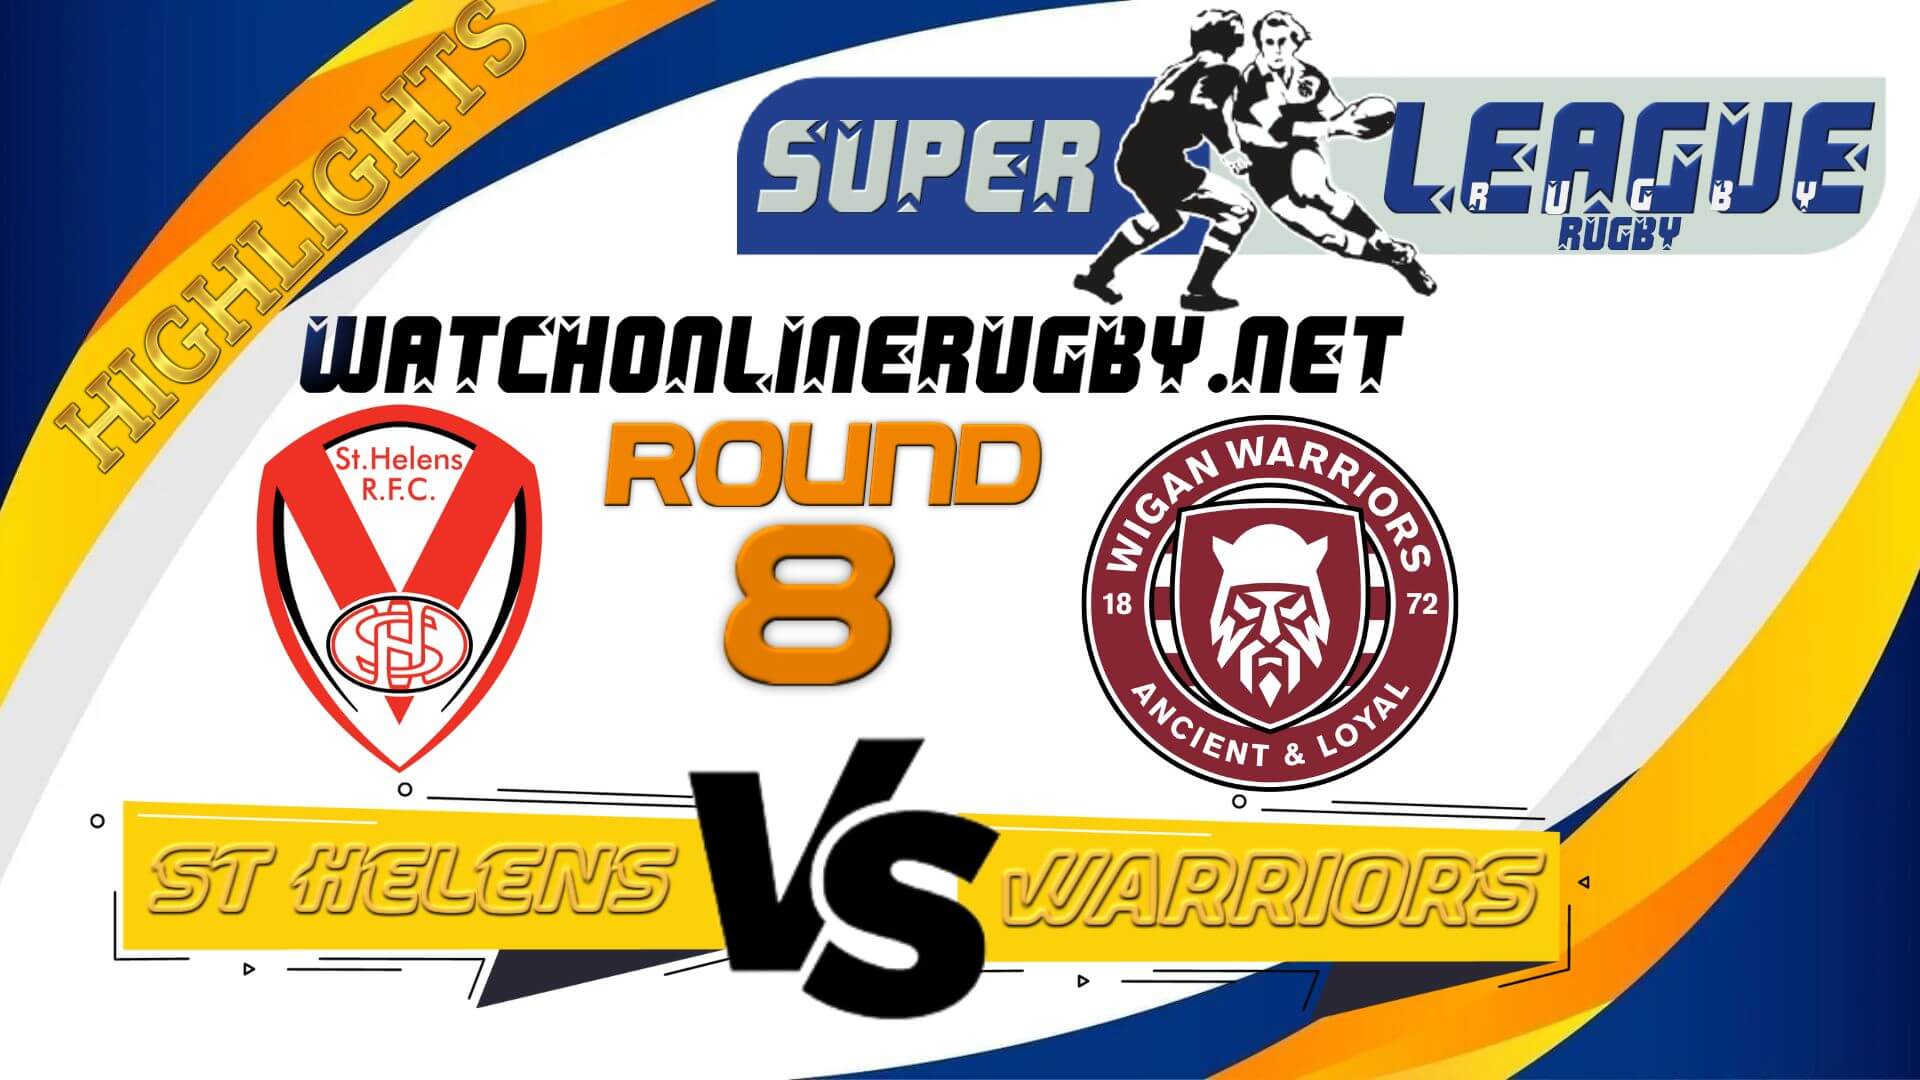 St Helens Vs Wigan Warriors Super League Rugby 2022 RD 8